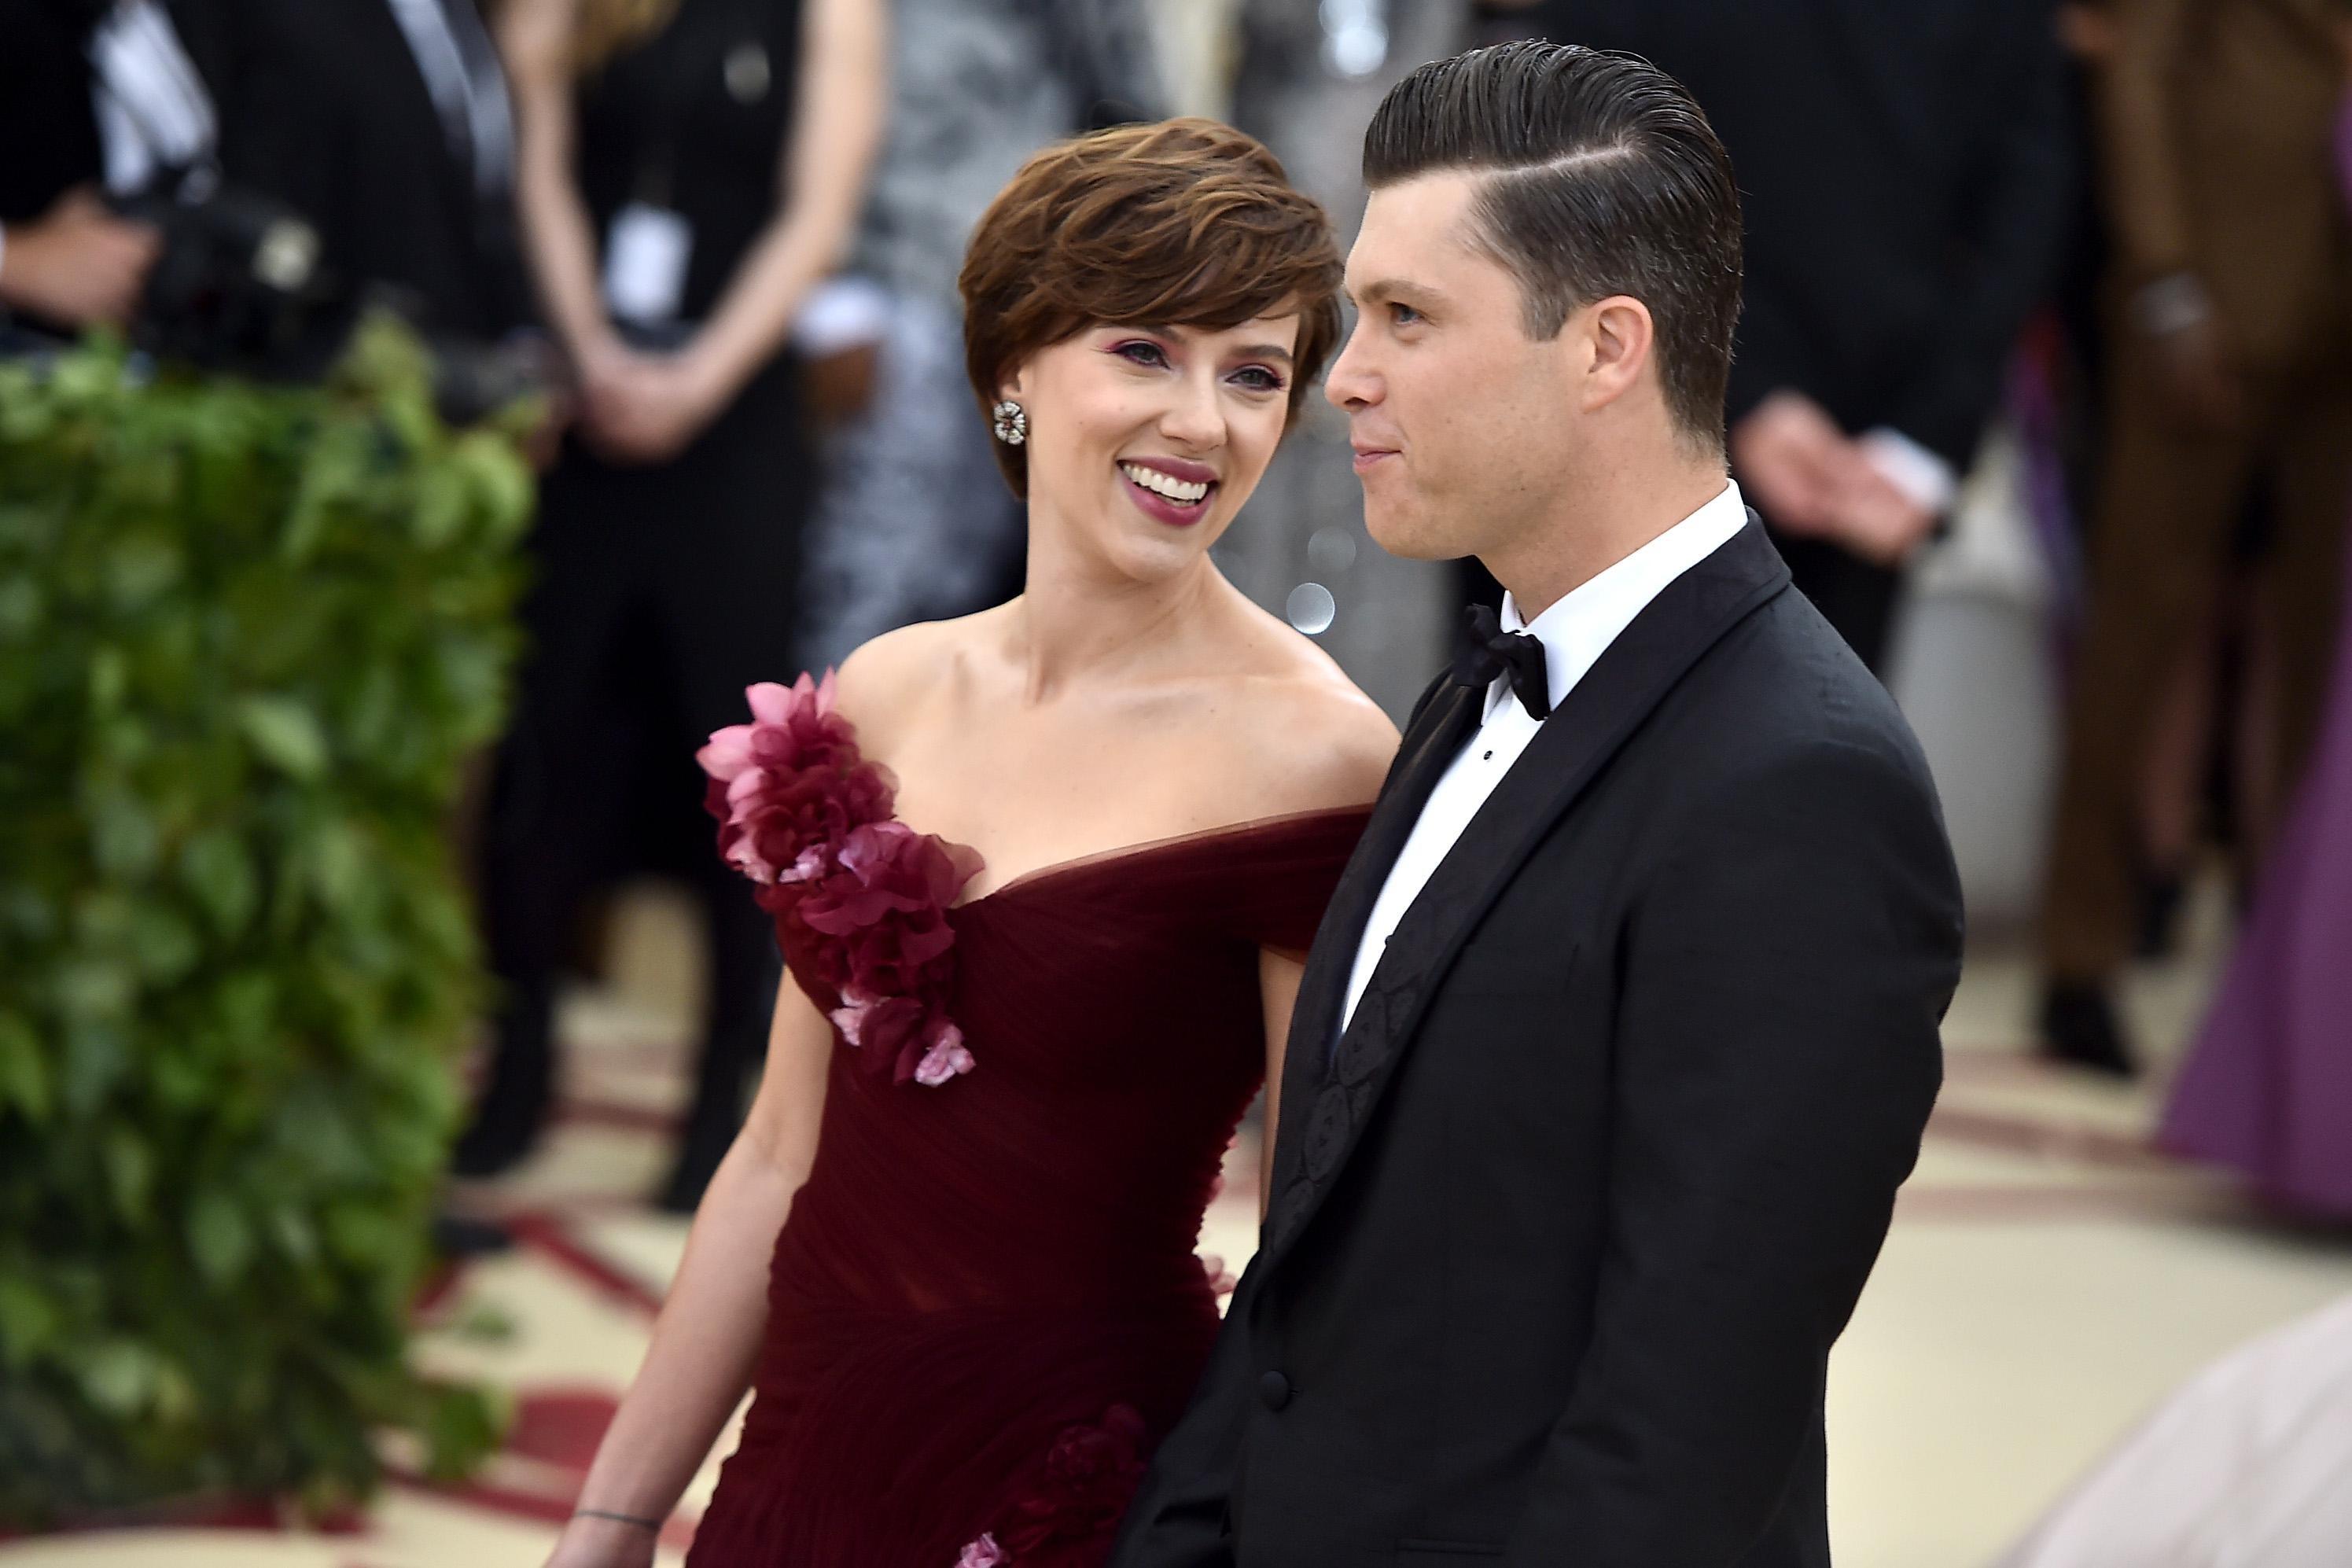 Scarlett Johansson and Colin Jost walk the red carpet at the Heavenly Bodies: Fashion & The Catholic Imagination Costume Institute Gala at The Metropolitan Museum of Art on May 7, 2018 in New York City.